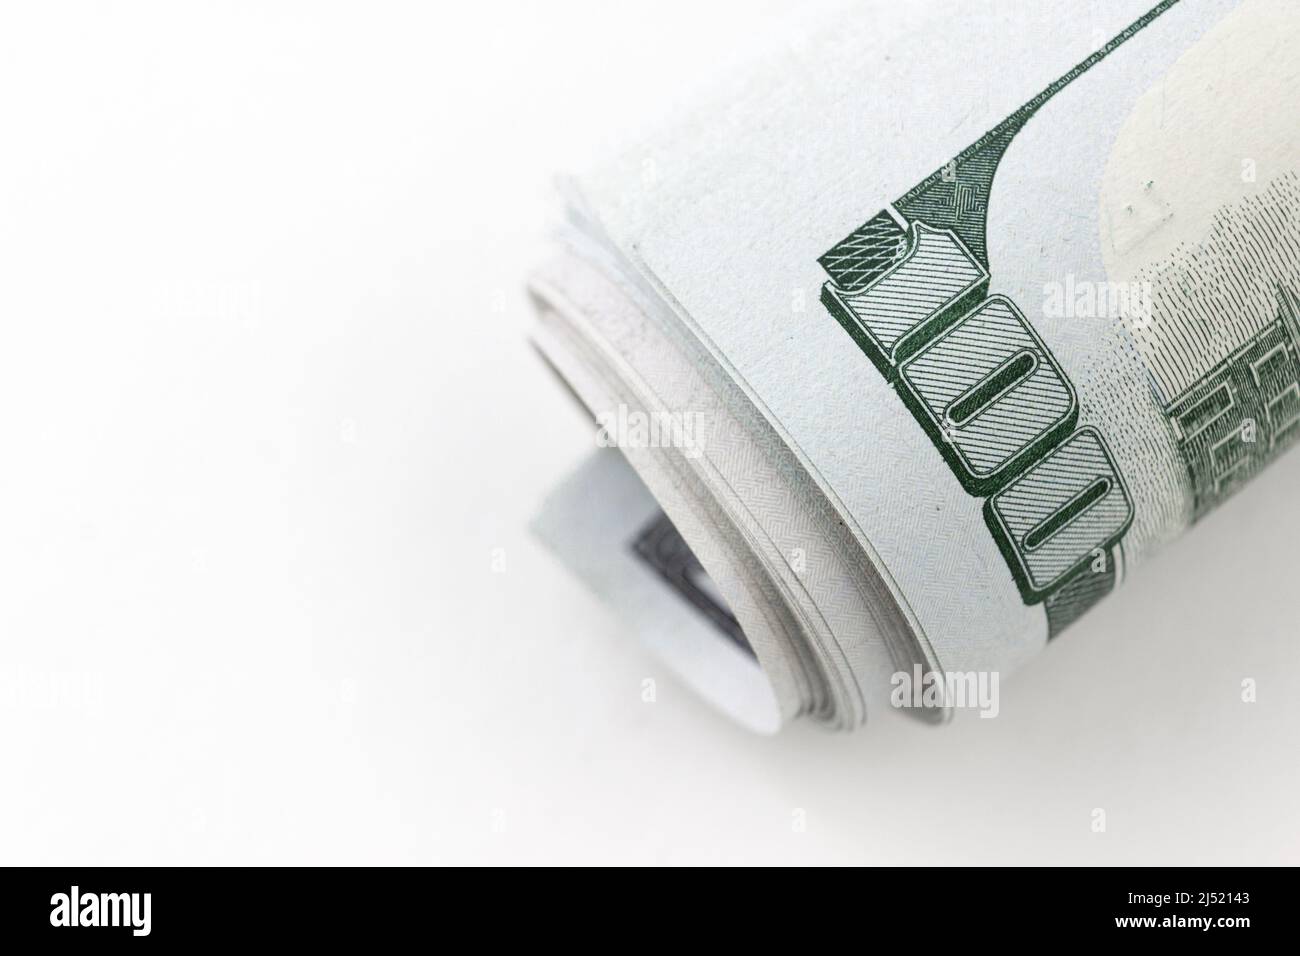 One hundred American dollars. 100.US Currency One Hundred Dollar Bills arranged in a fan. Twisted United States dollars, hundred USD banknote. Stock Photo